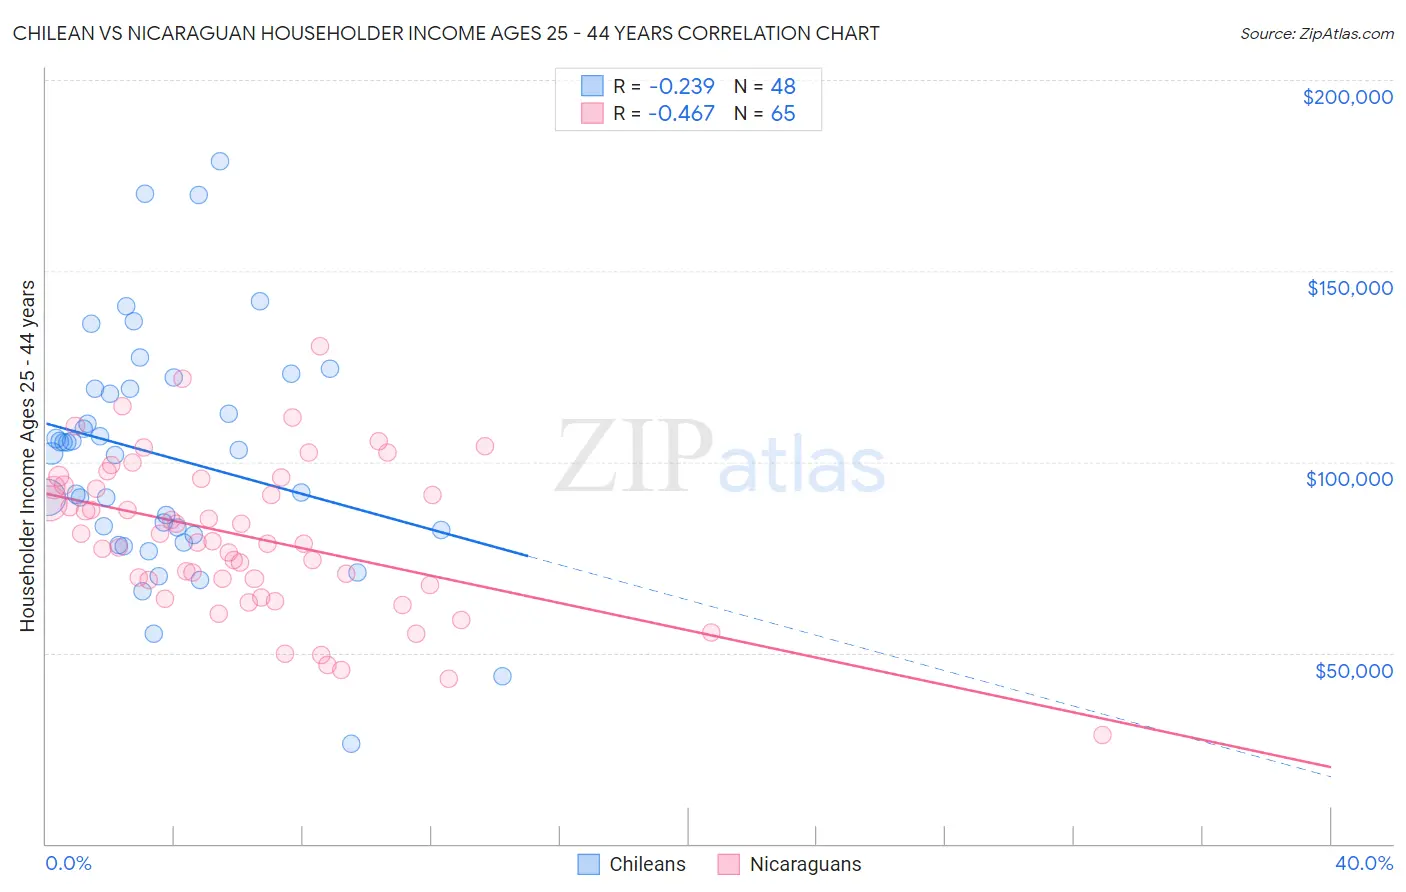 Chilean vs Nicaraguan Householder Income Ages 25 - 44 years